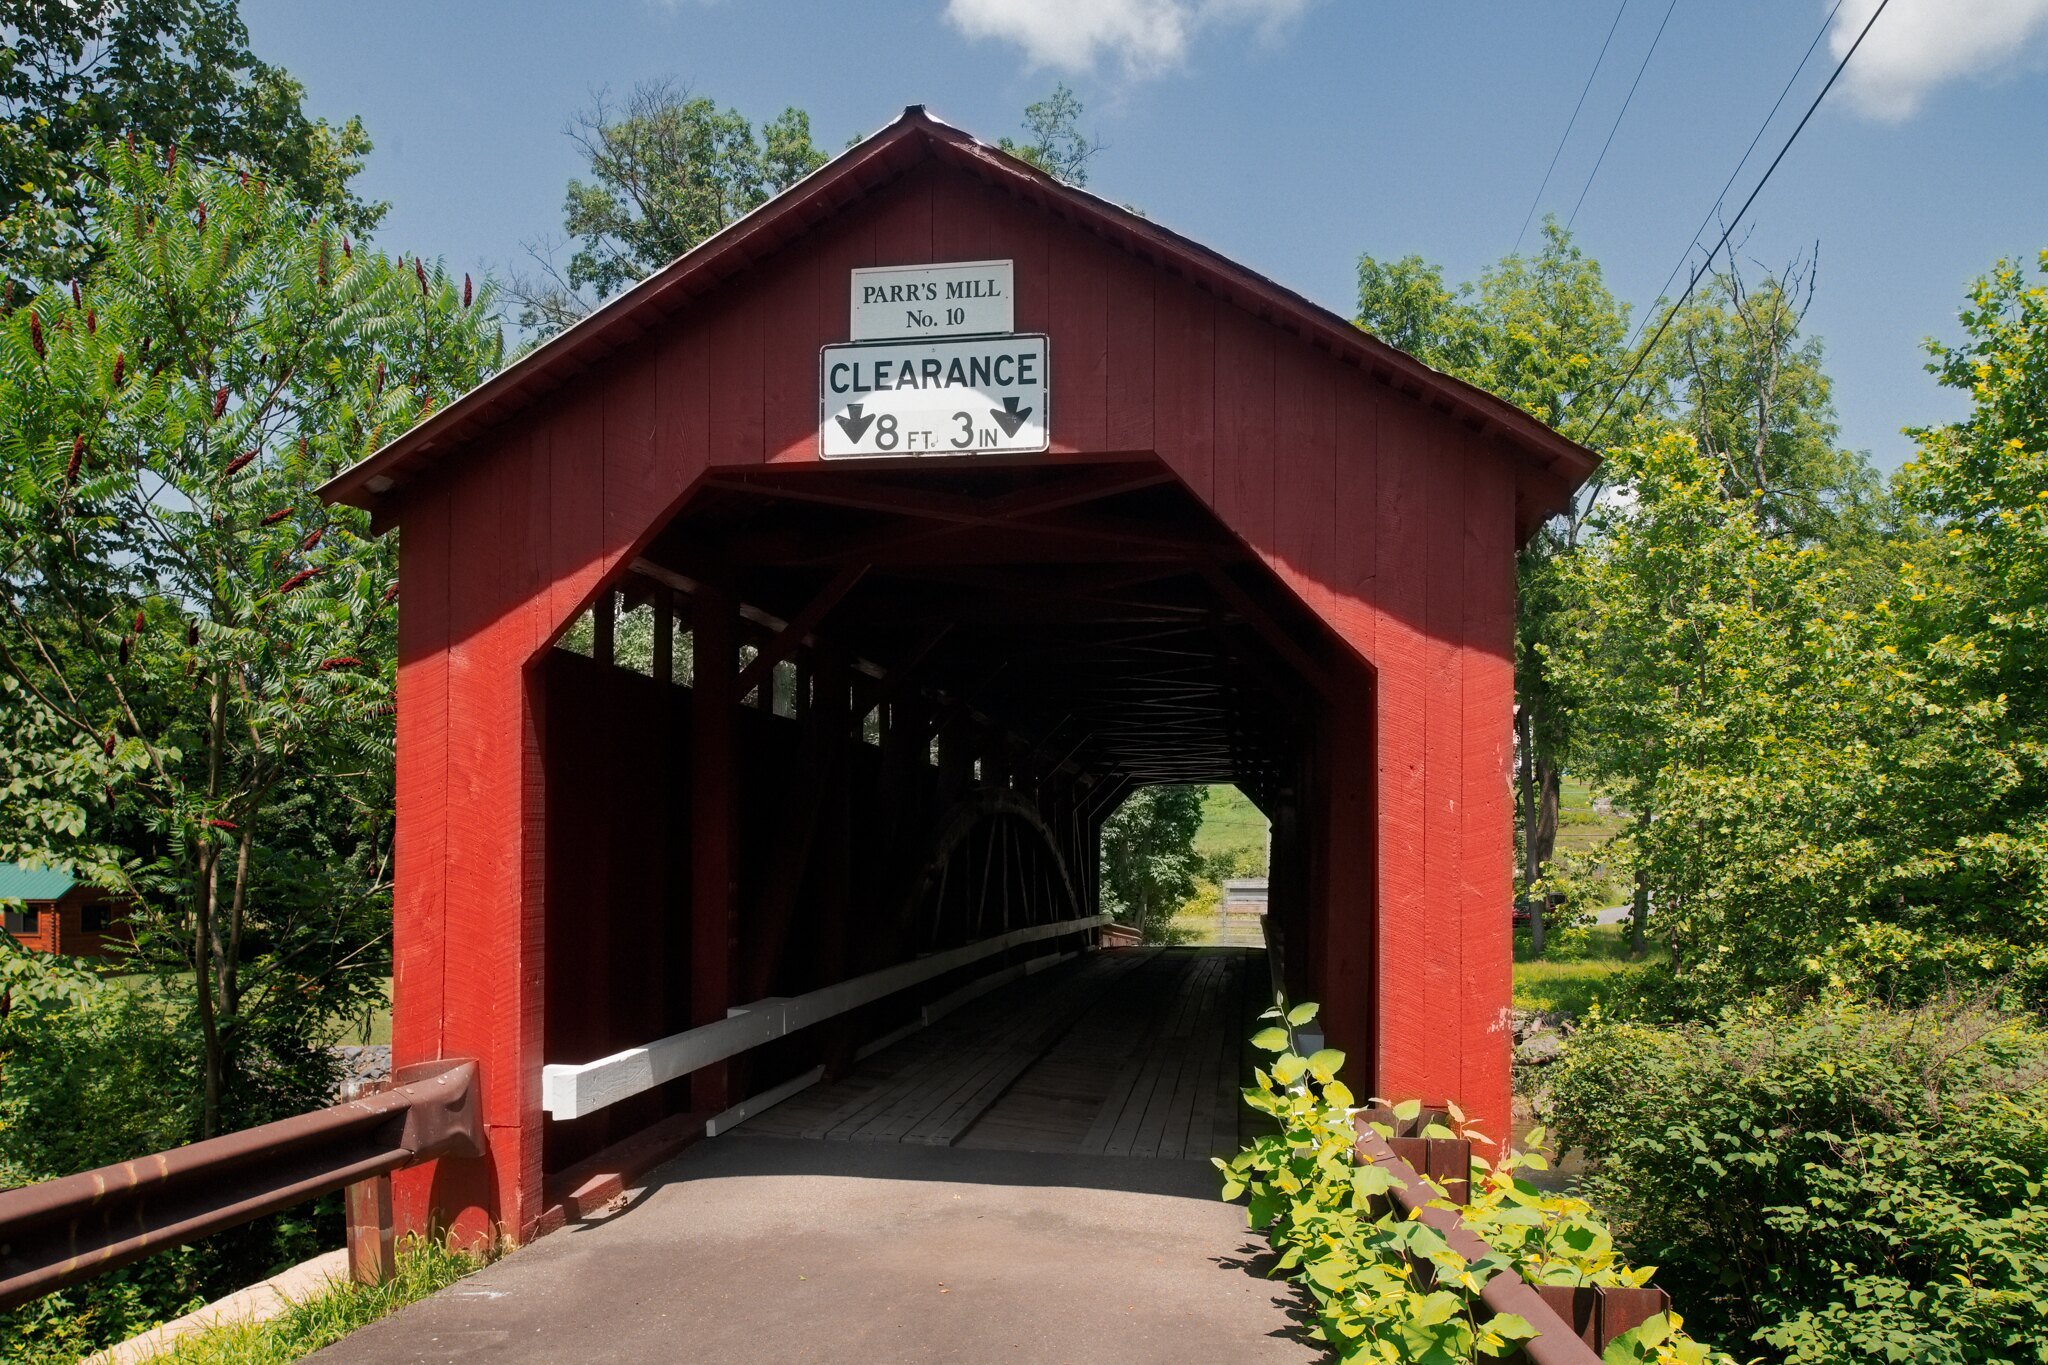  Parr's Mill Covered Bridge in Franklin Township, Columbia County, PA.  Built in 1865. 